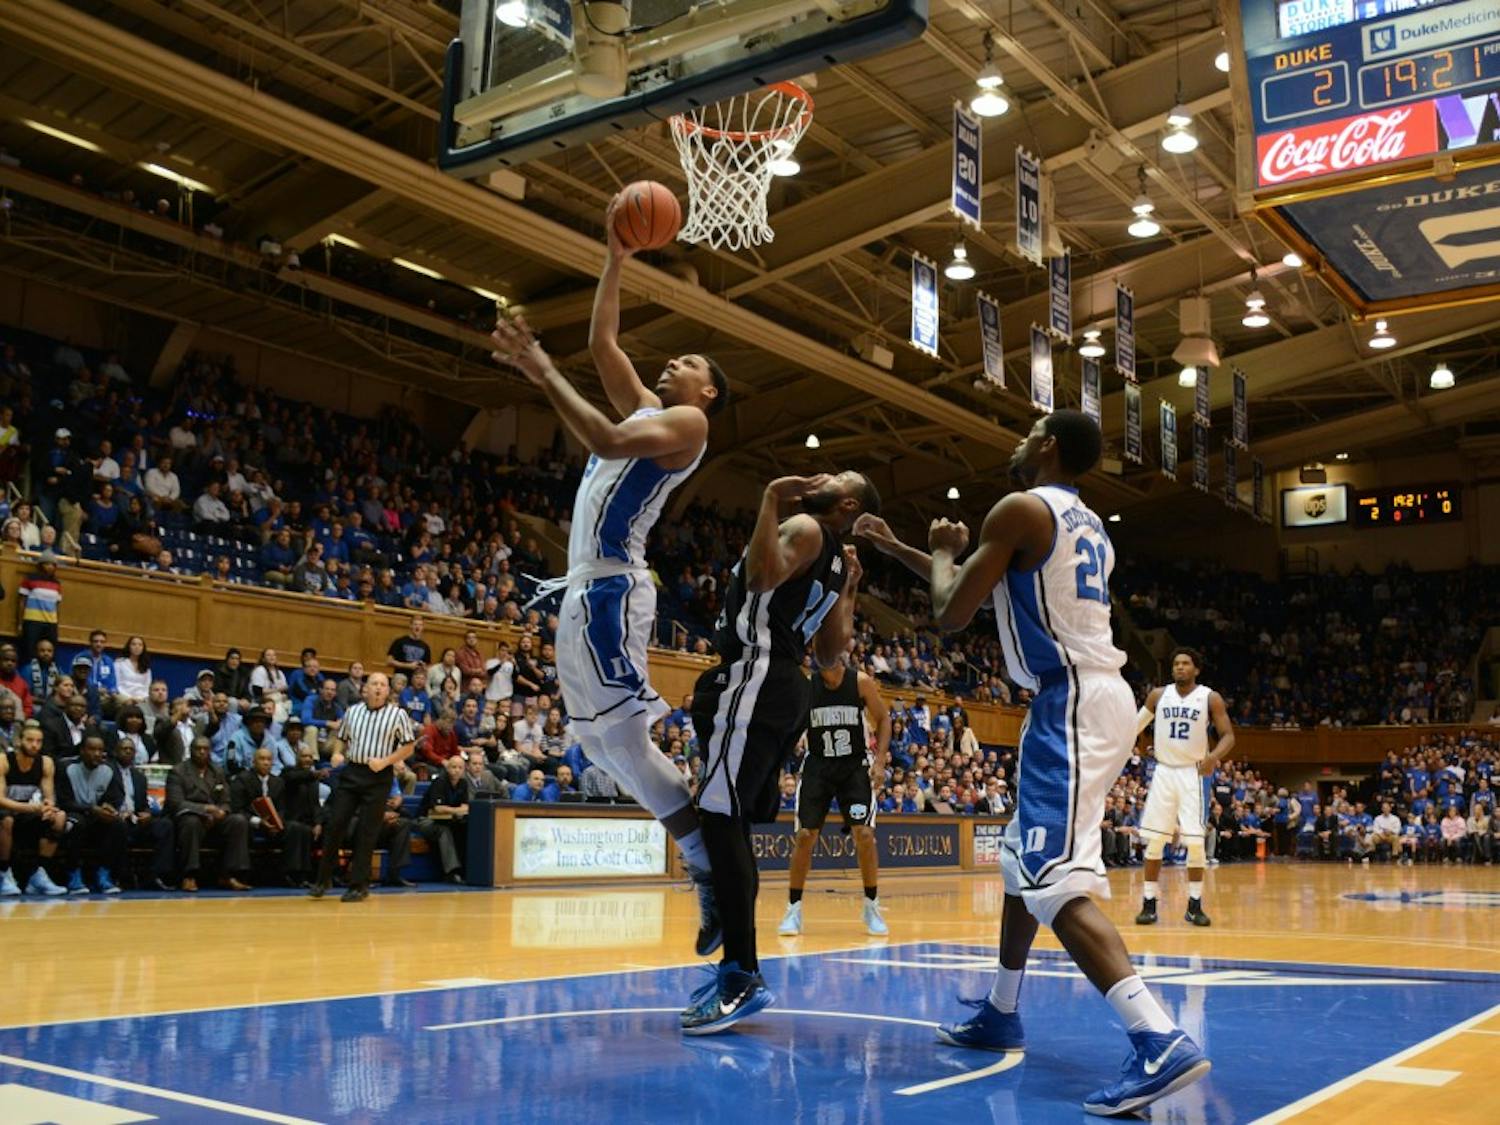 Freshman Jahlil Okafor had 15 points and five rebounds as the Blue Devils steamrolled Livingstone in their first exhibition contest Tuesday night.